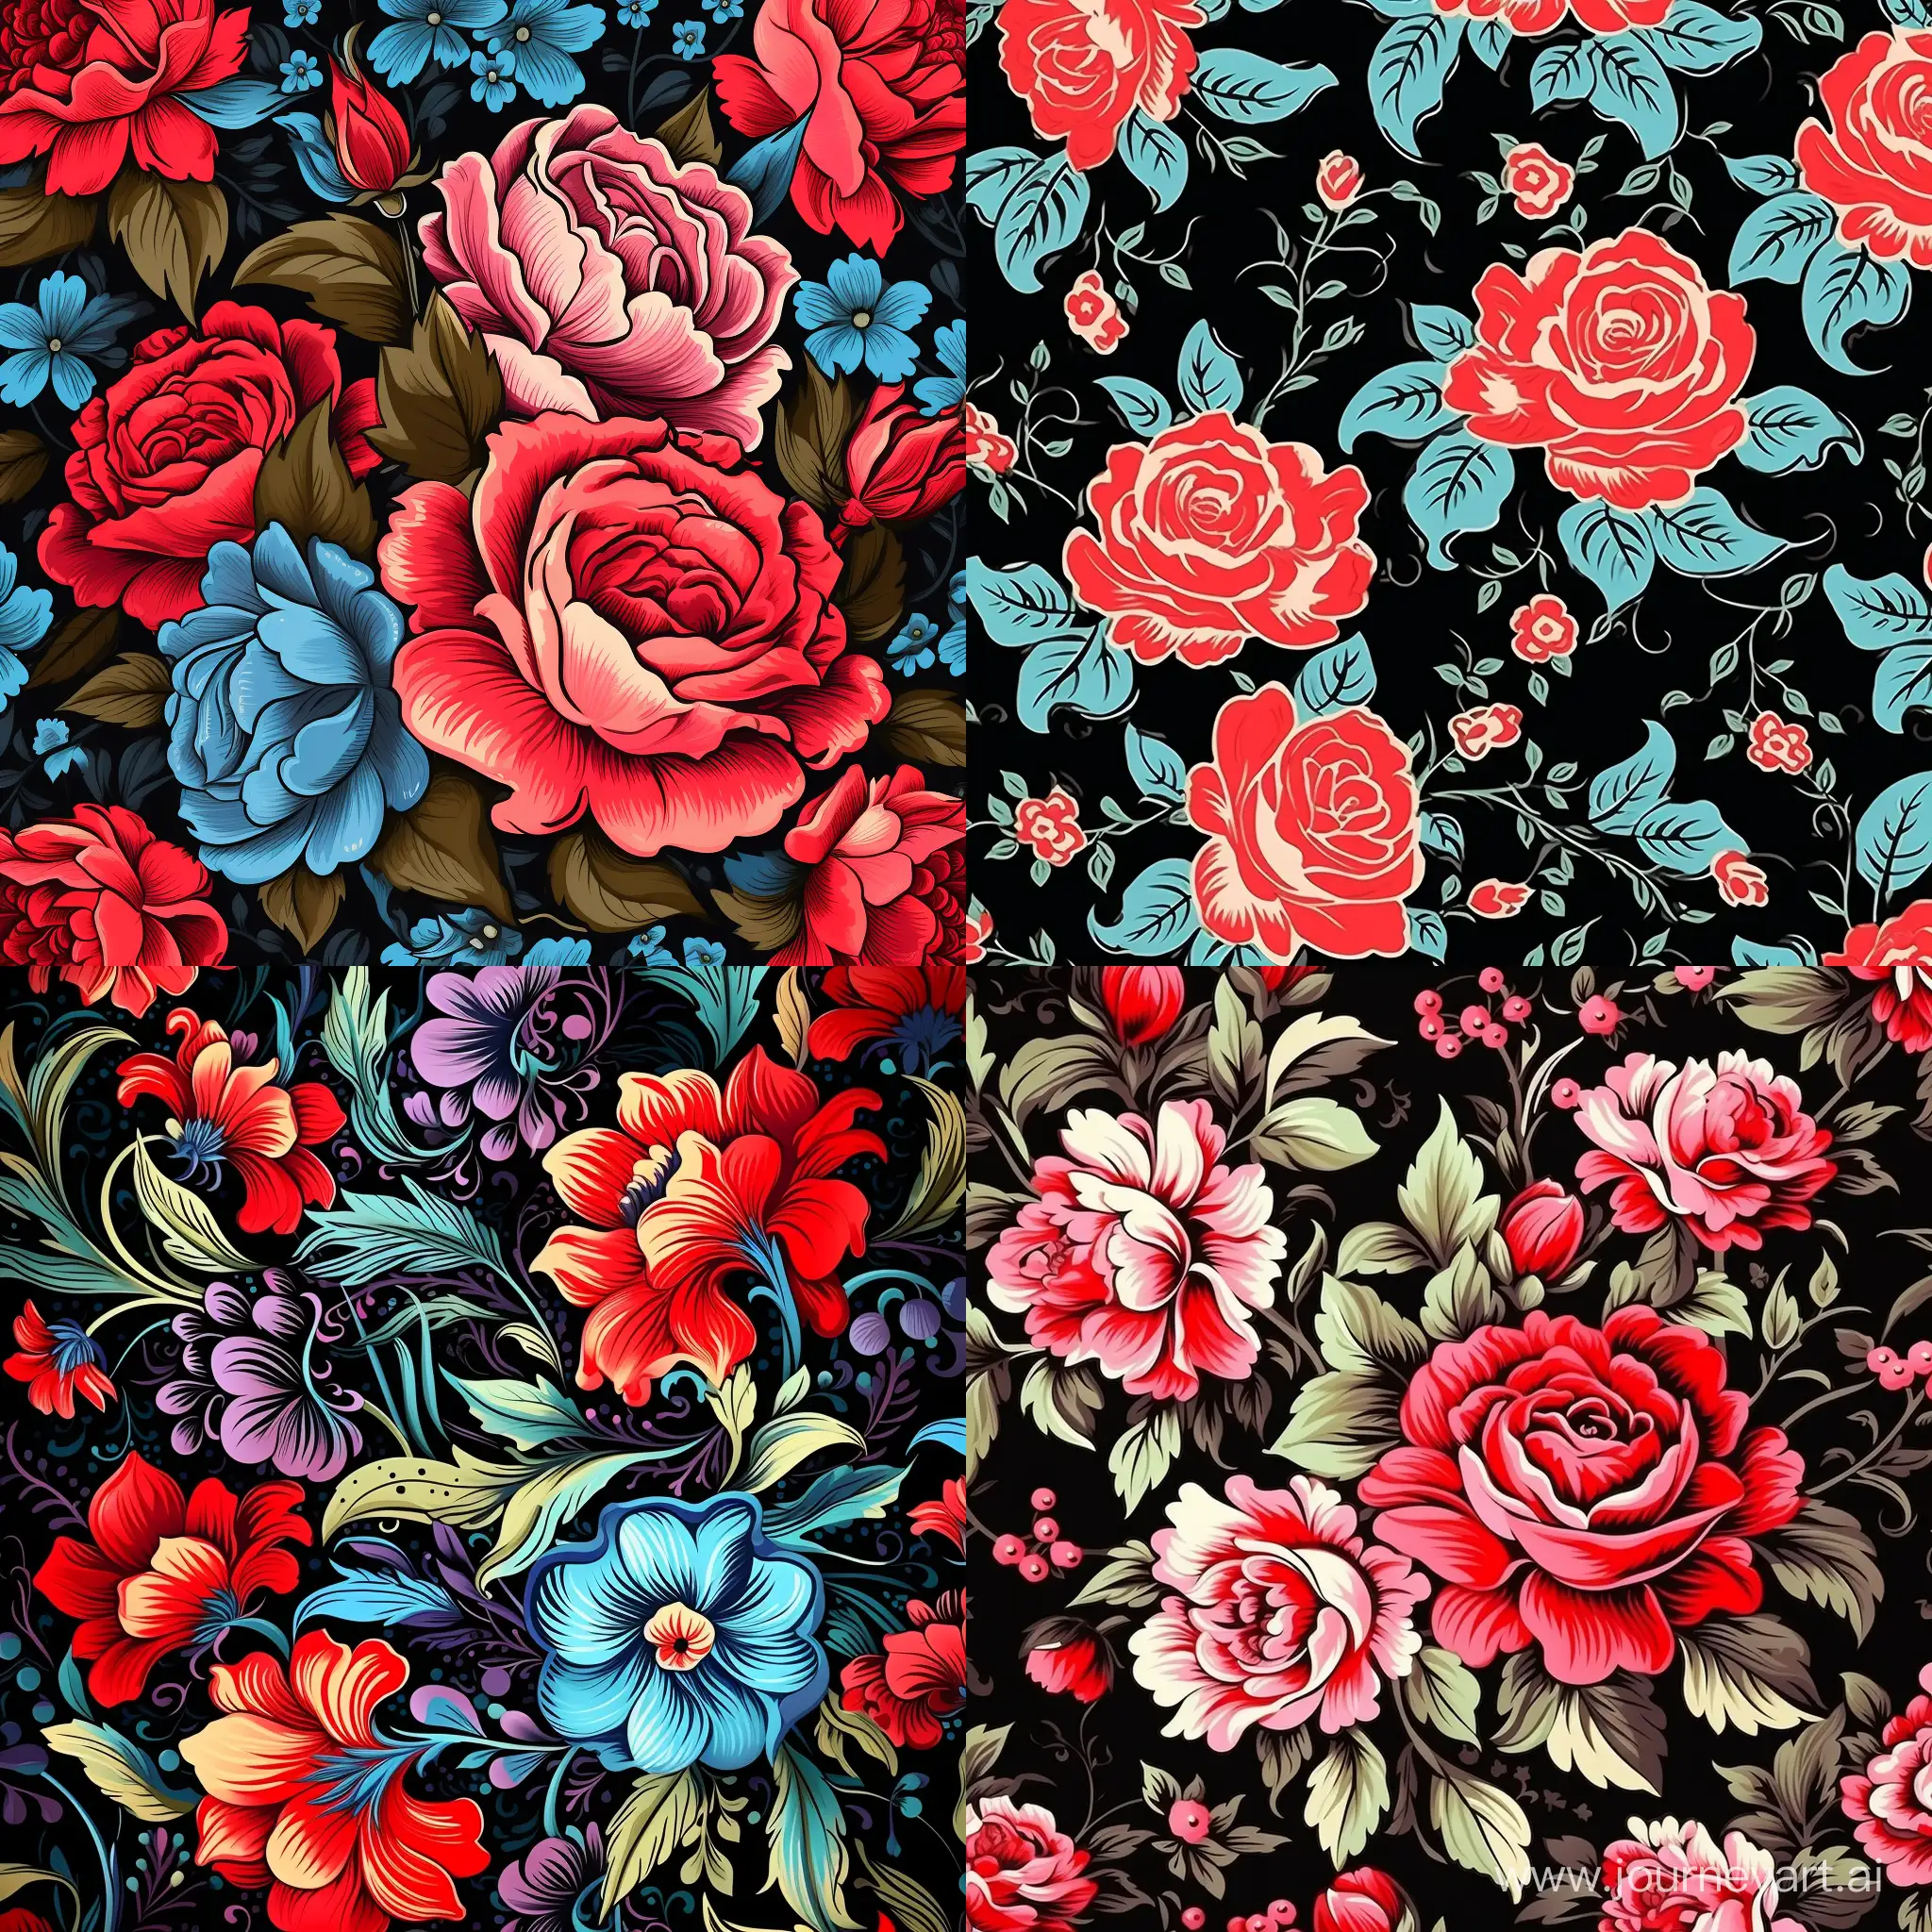 floral pattern, in the style of rockabilly